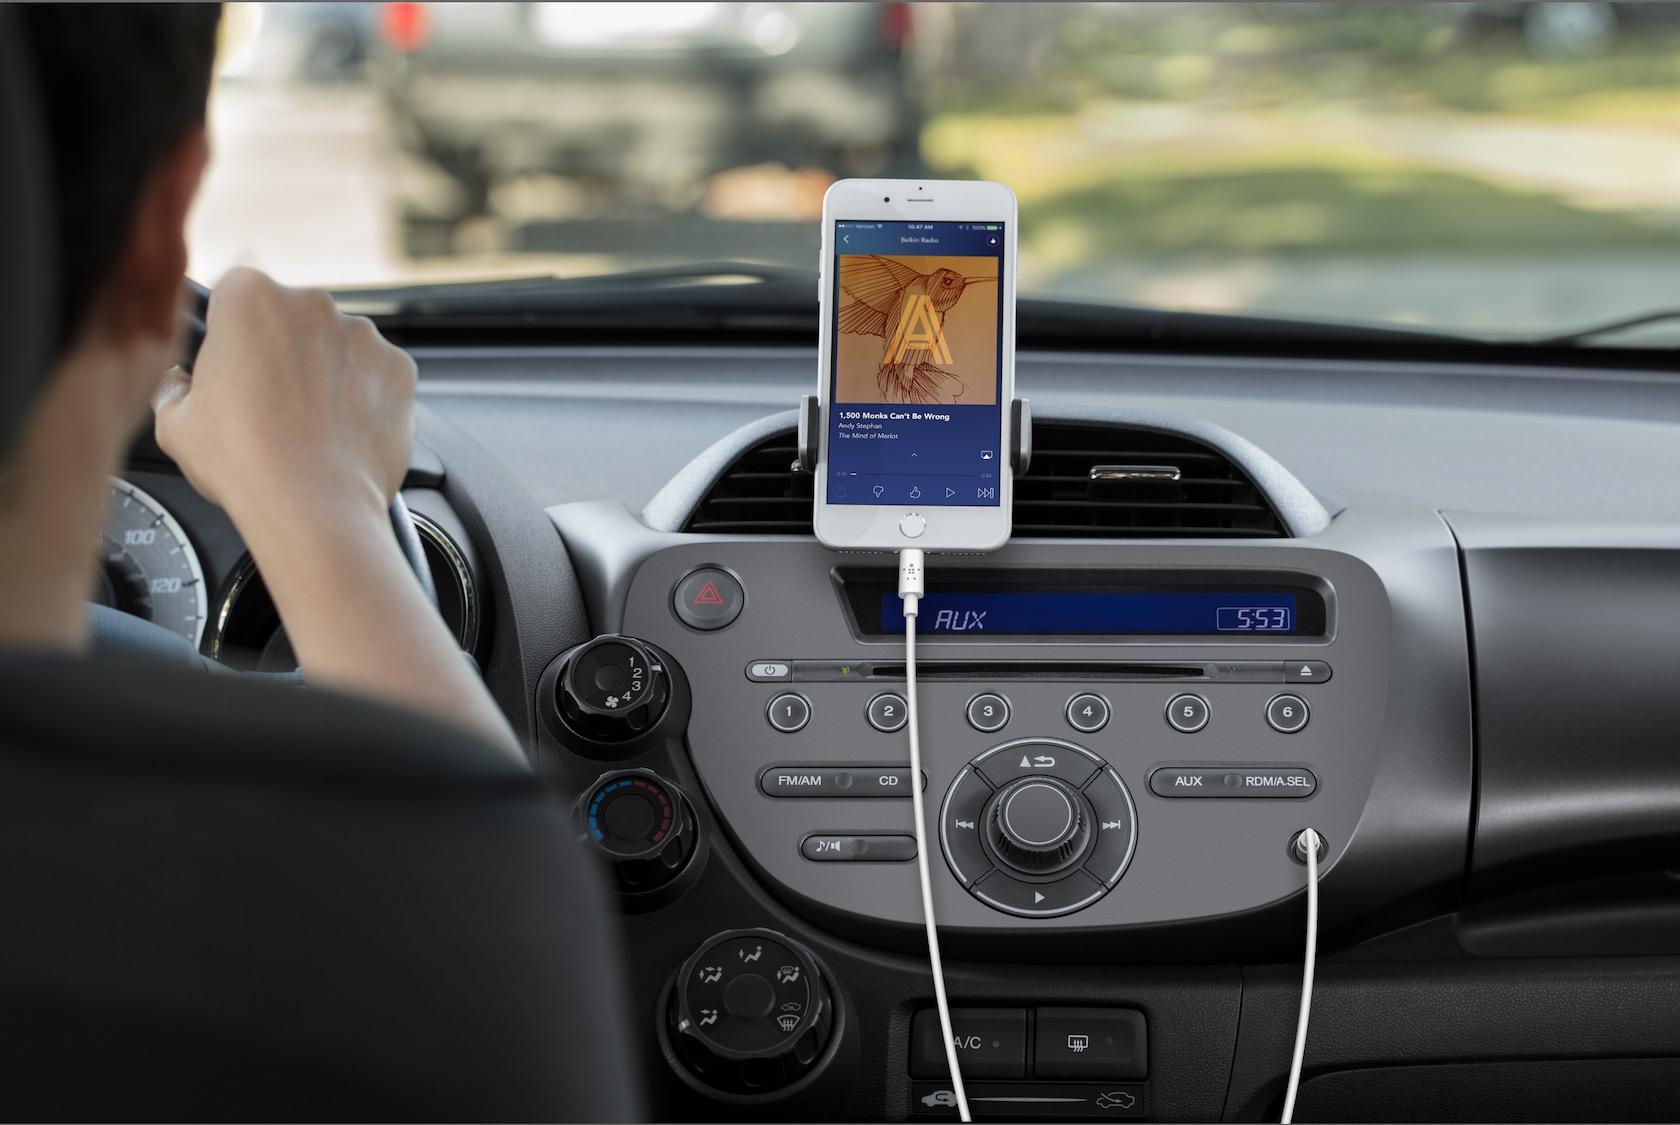 Belkin made the aux cable upgrade the modern iPhone needs SlashGear